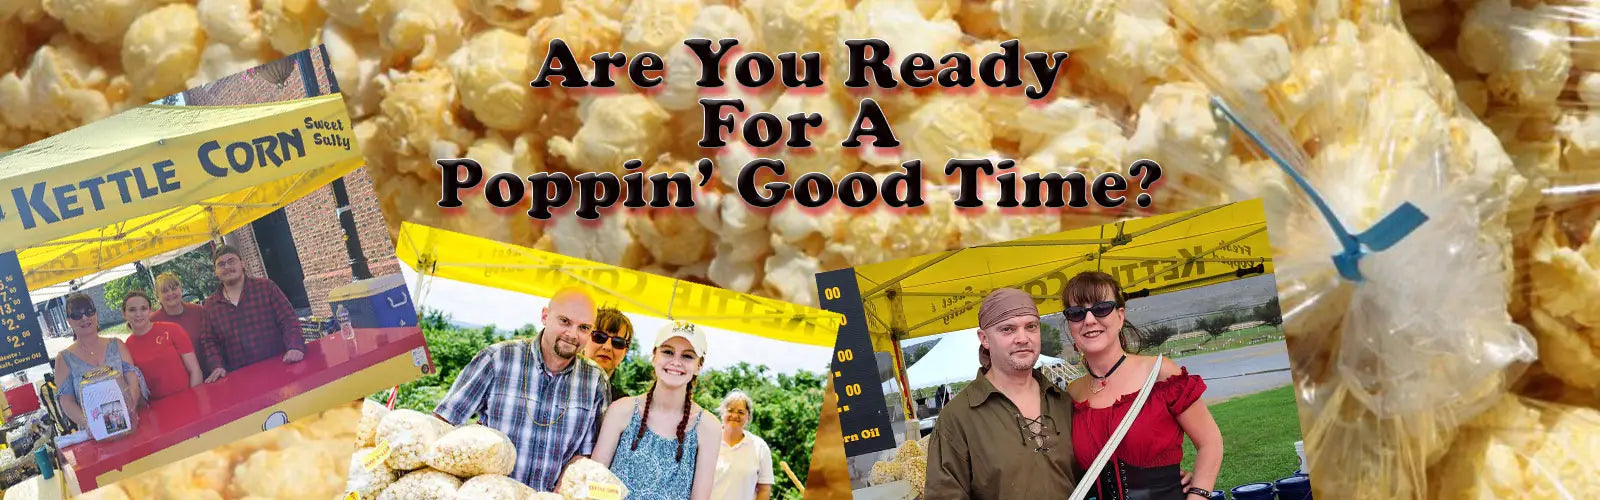 Kettle Corn by Crim's Concessions in Winchester, Virginia Main Page Banner Image